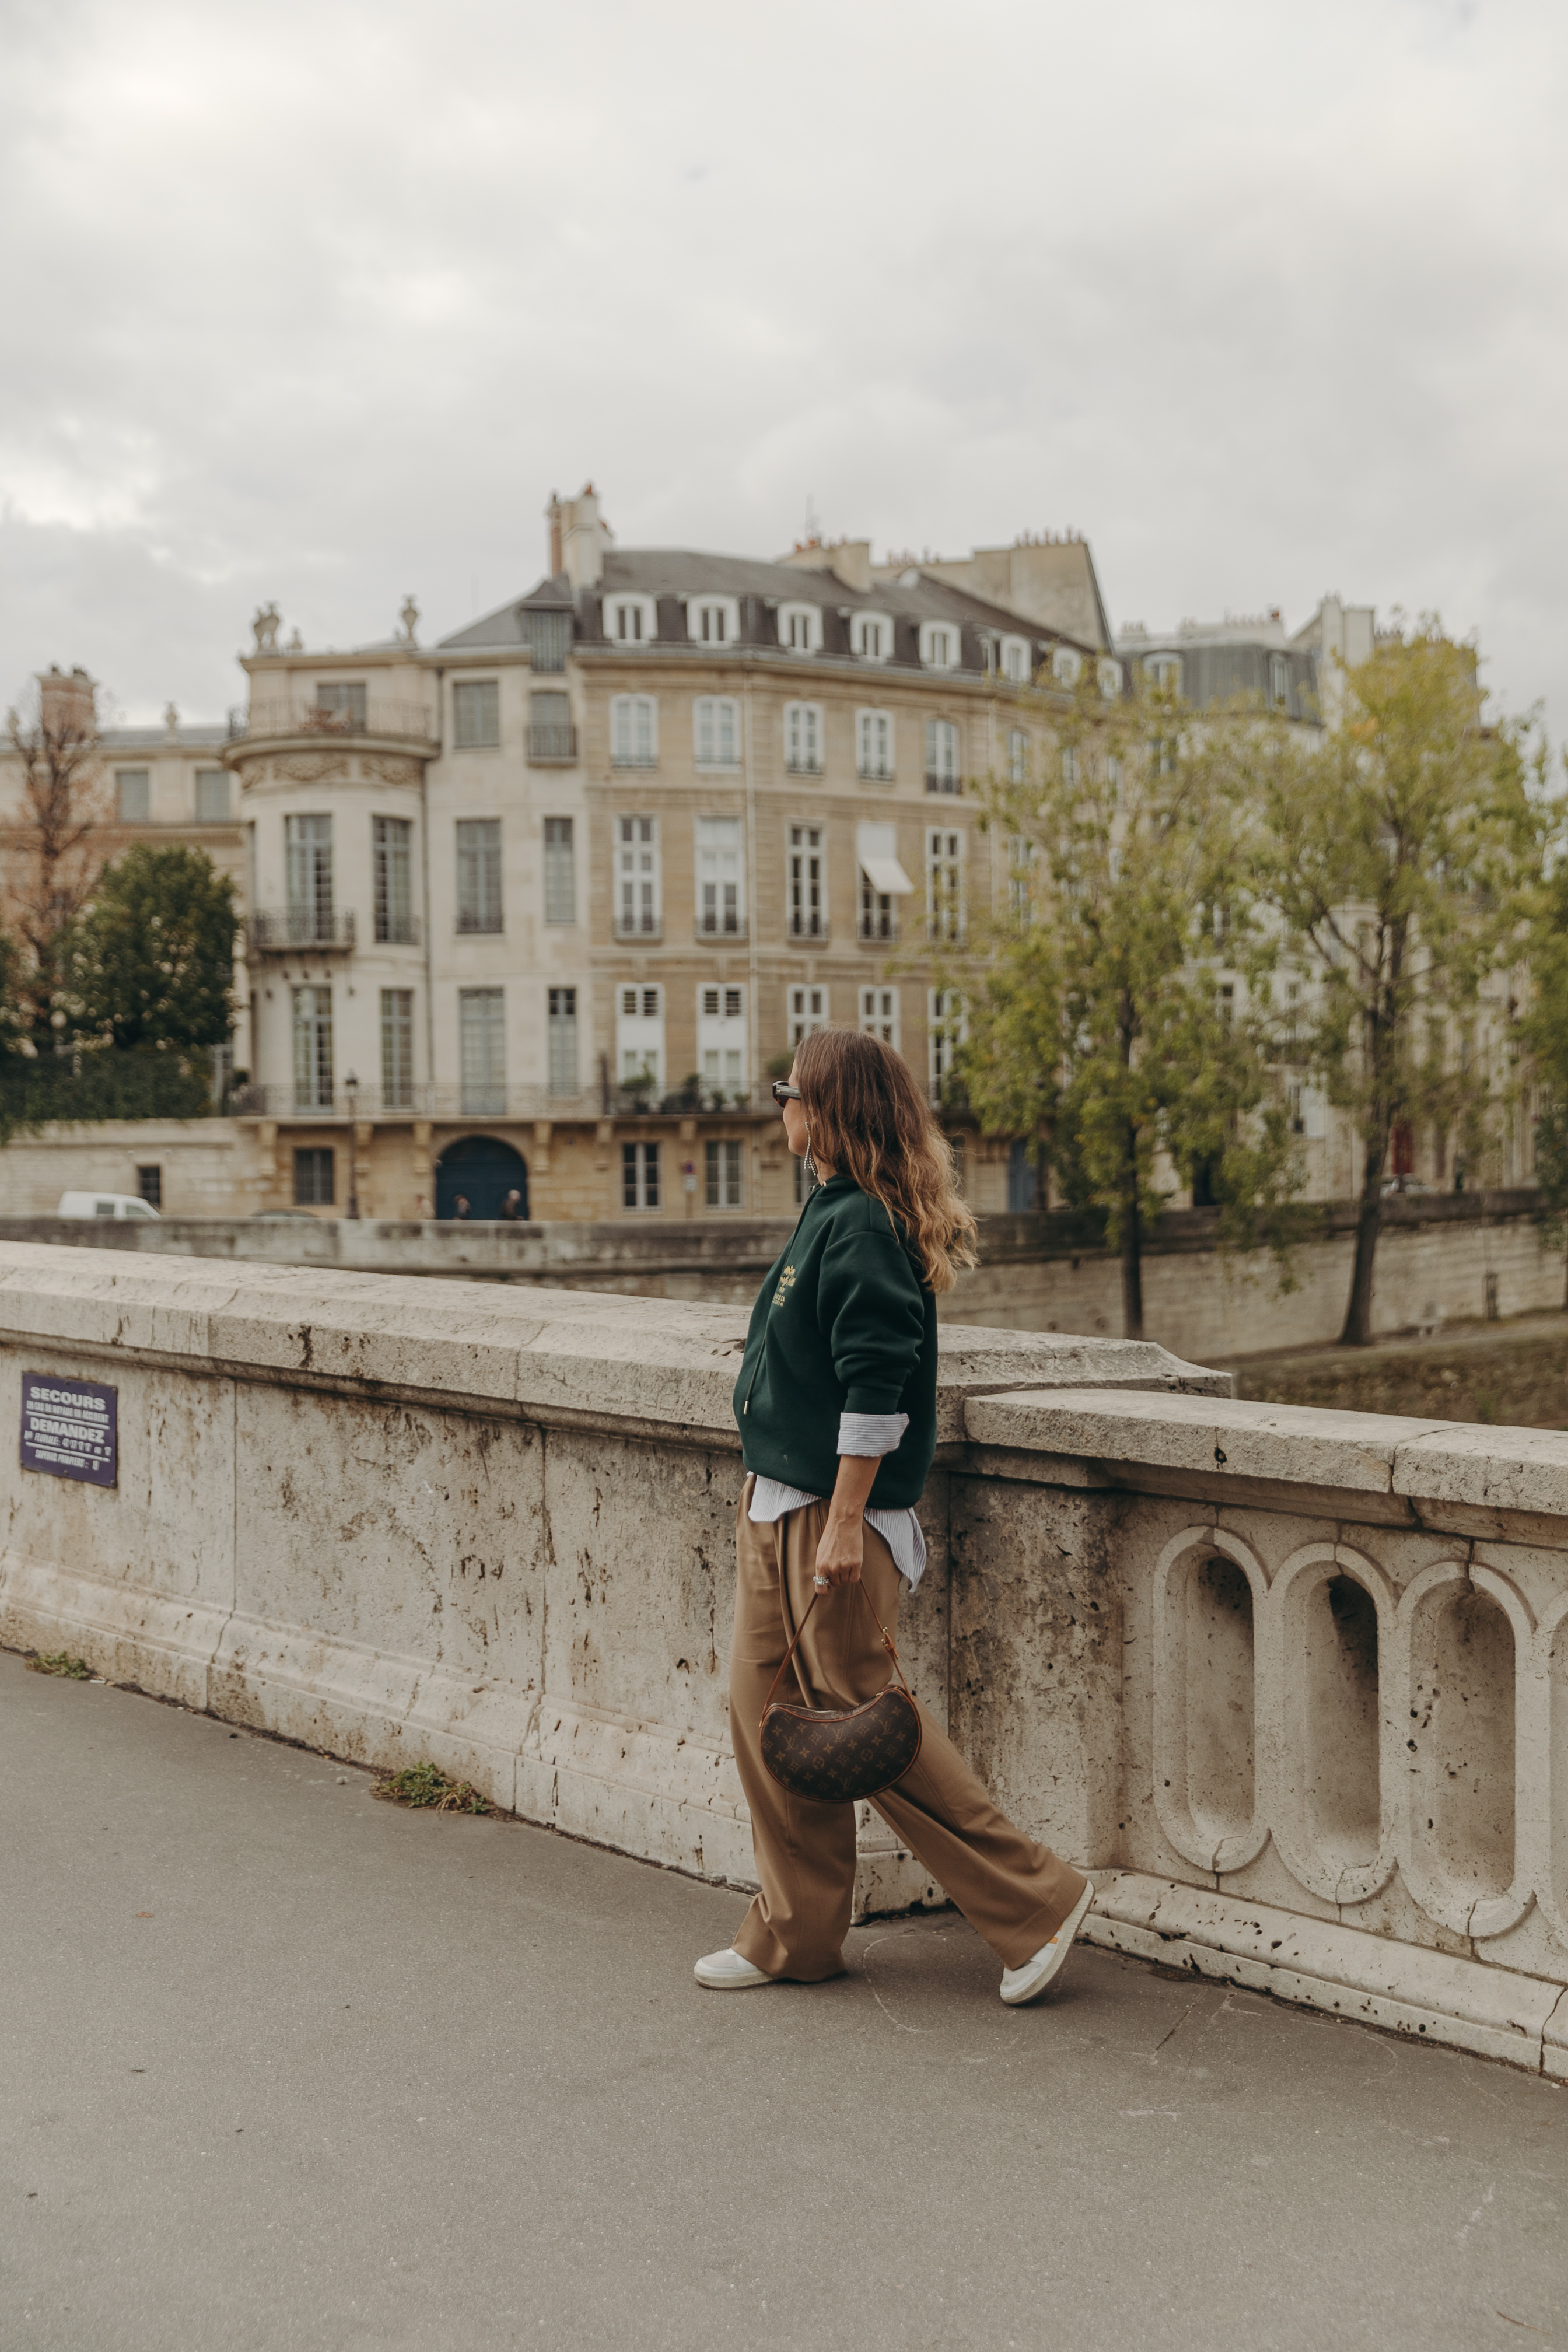 Sara from Collage Vintage at Paris Fashion Week wearing a oversize green sweatshirt, camel trousers, Louis Vuitton vintage bag and sneakers.